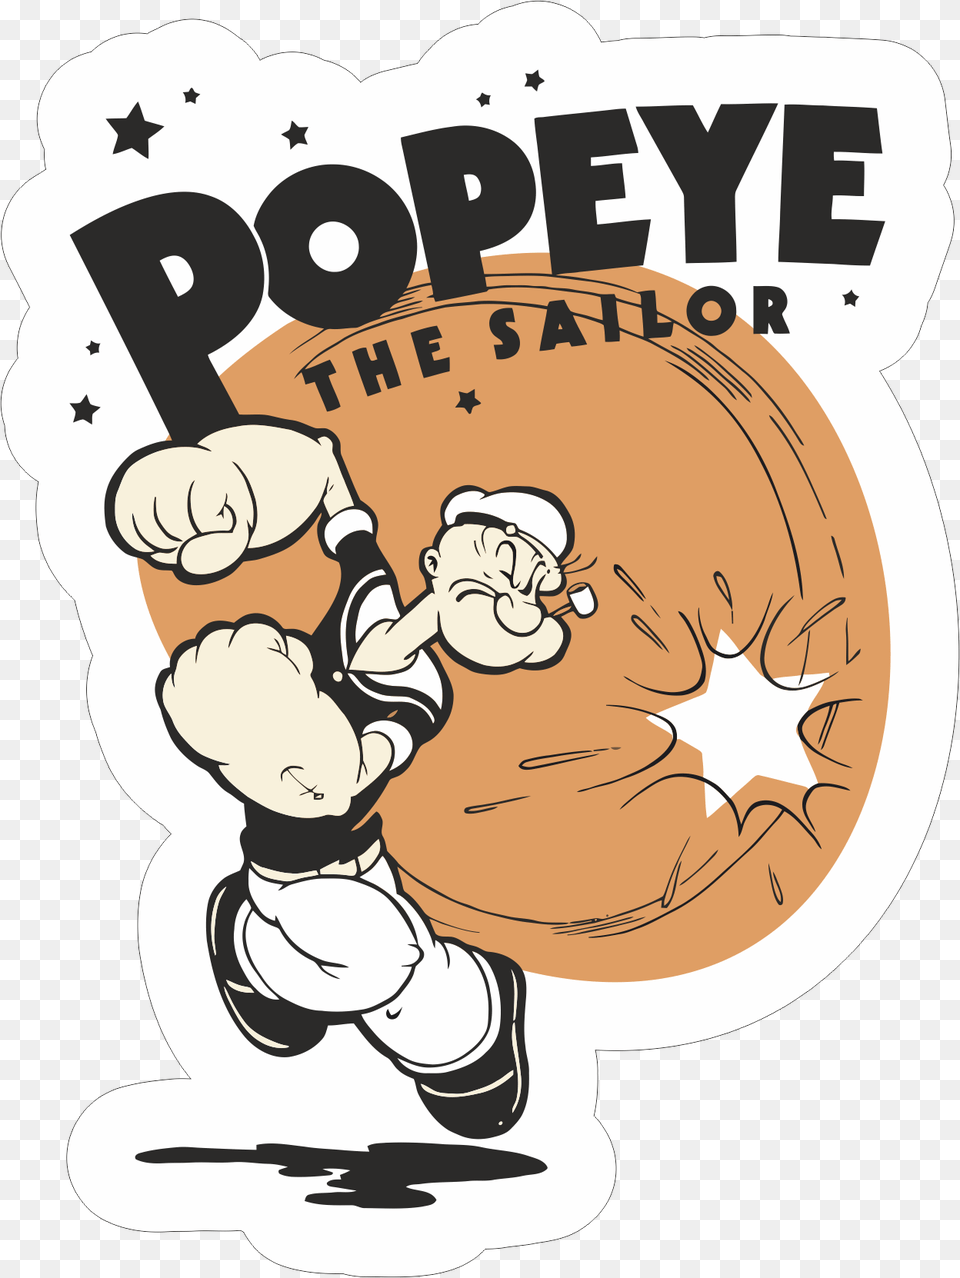 Popeye The Sailor Sticker Popeye Volume 1 Dvd, Book, Comics, Publication, Baby Png